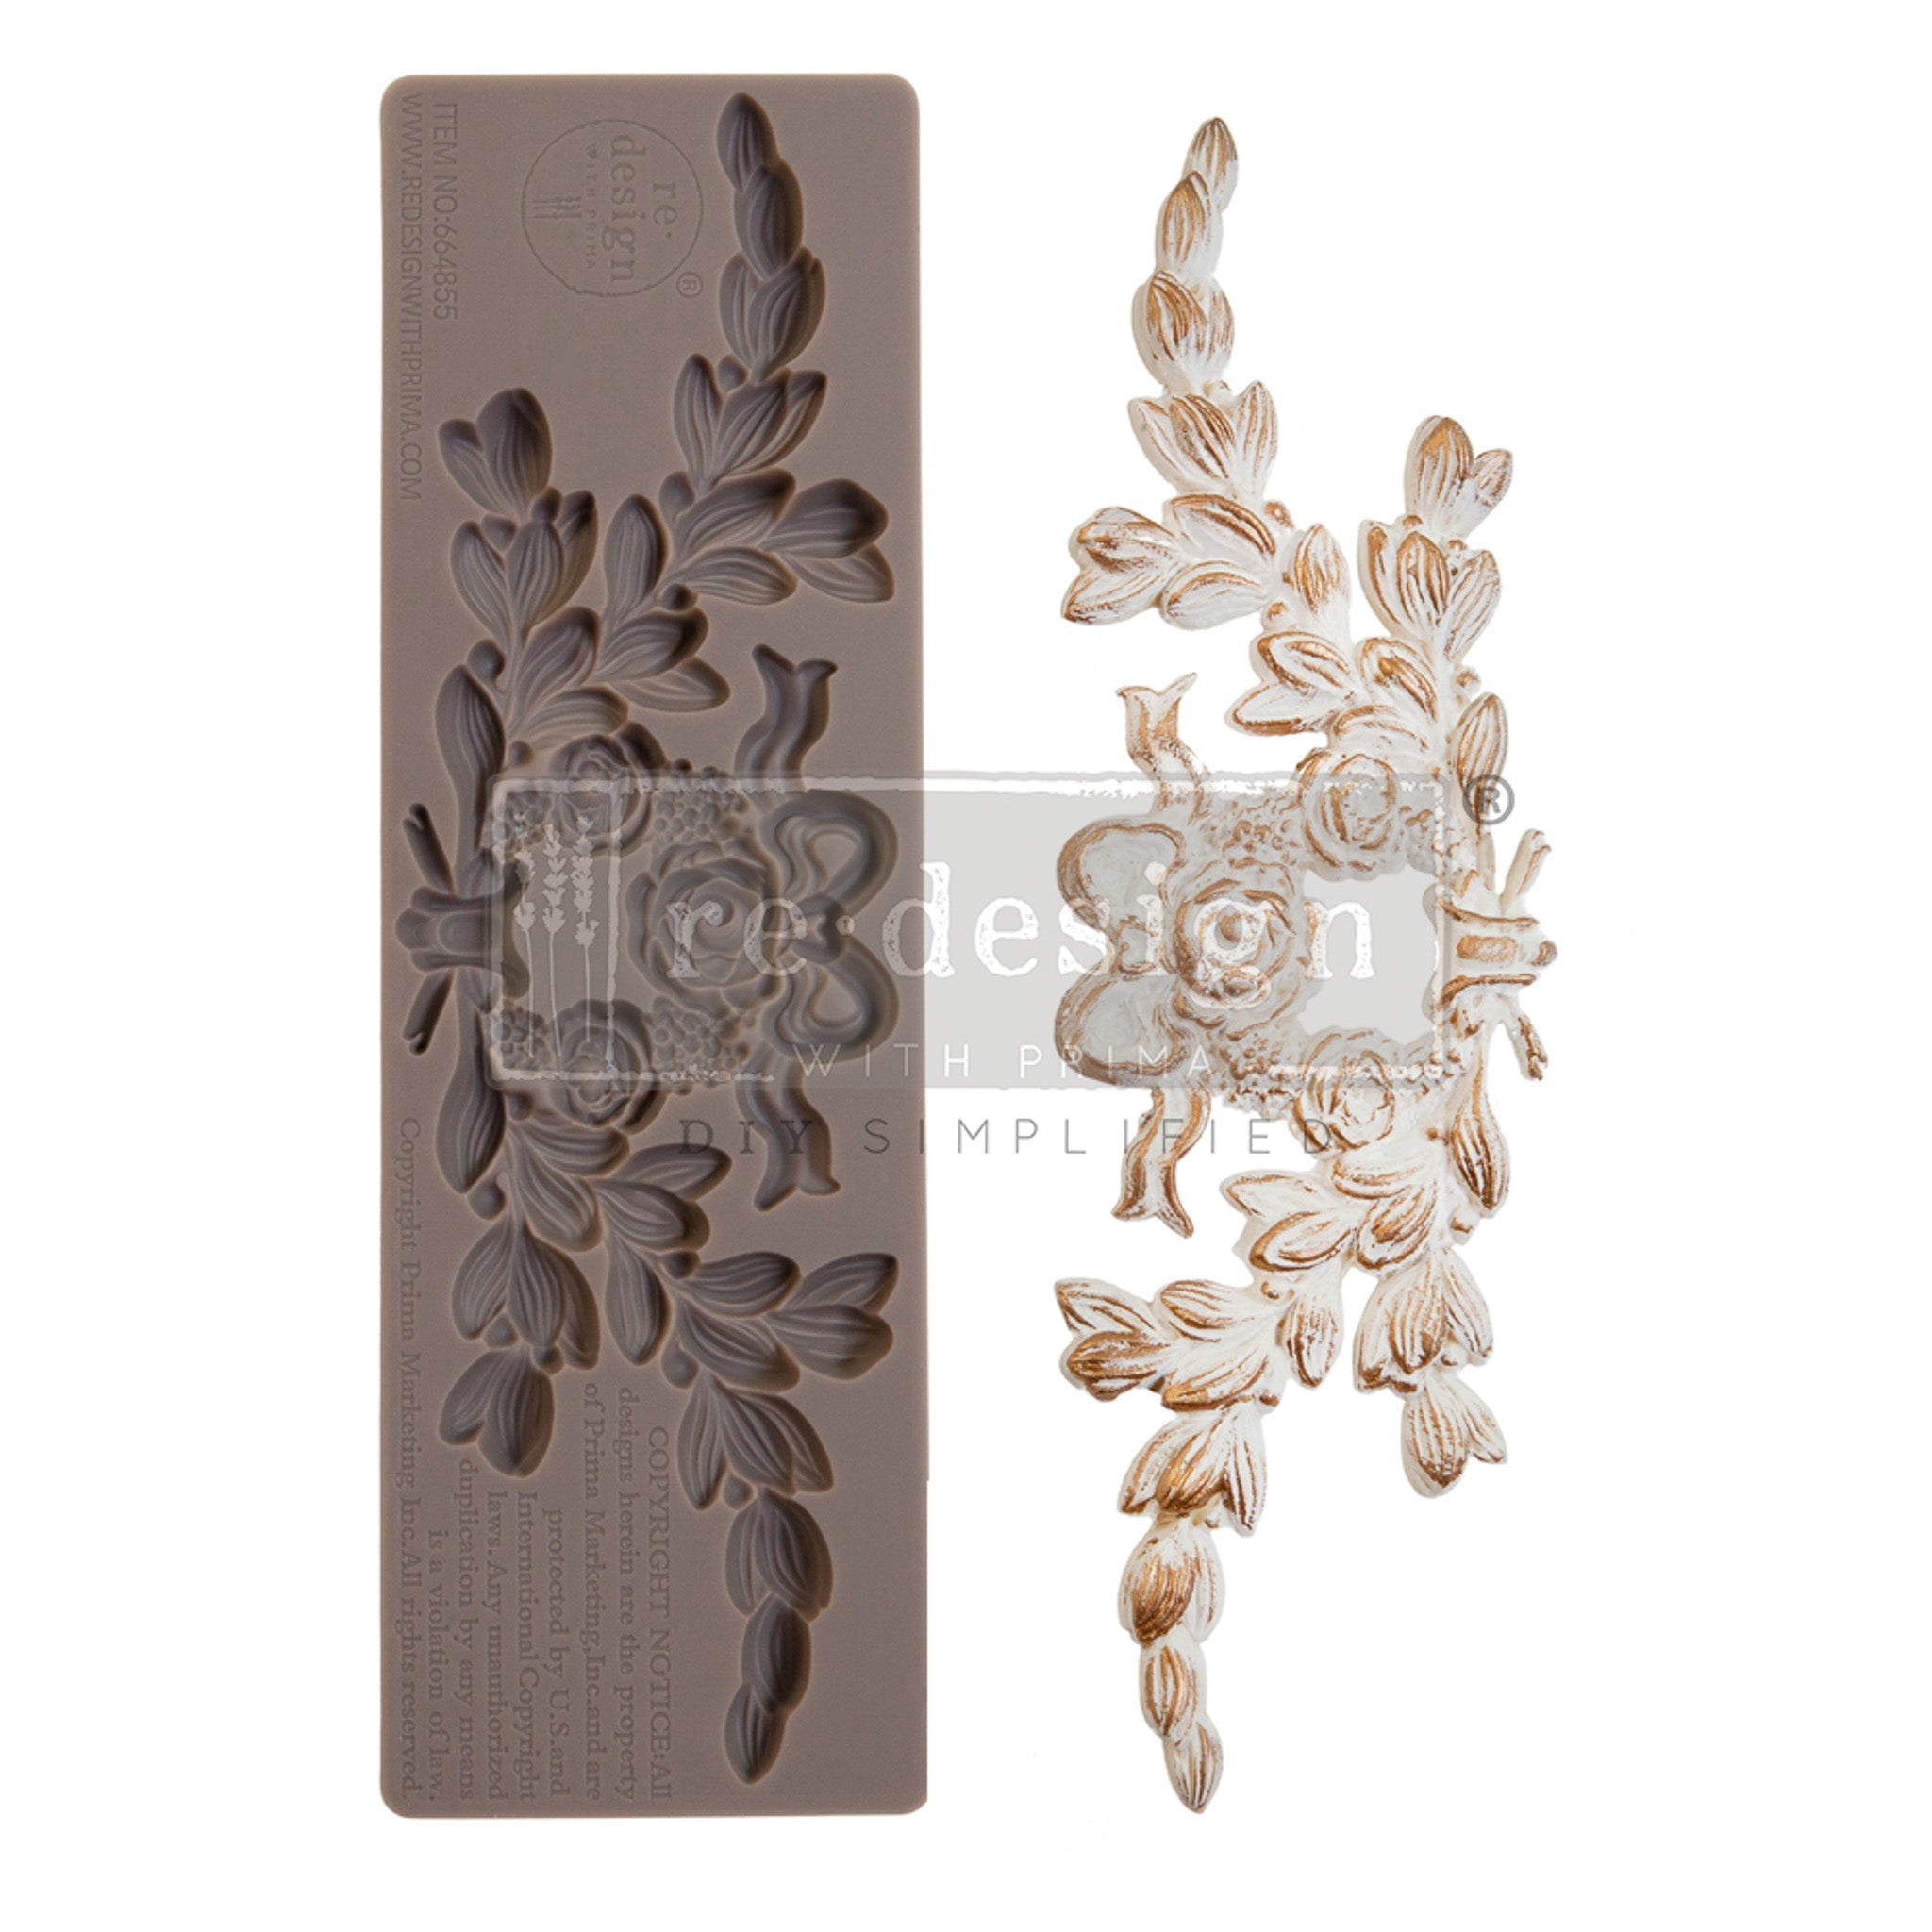 A brown silicone mould and its white and gold casting of a rose and leaves garland design are on a white background.